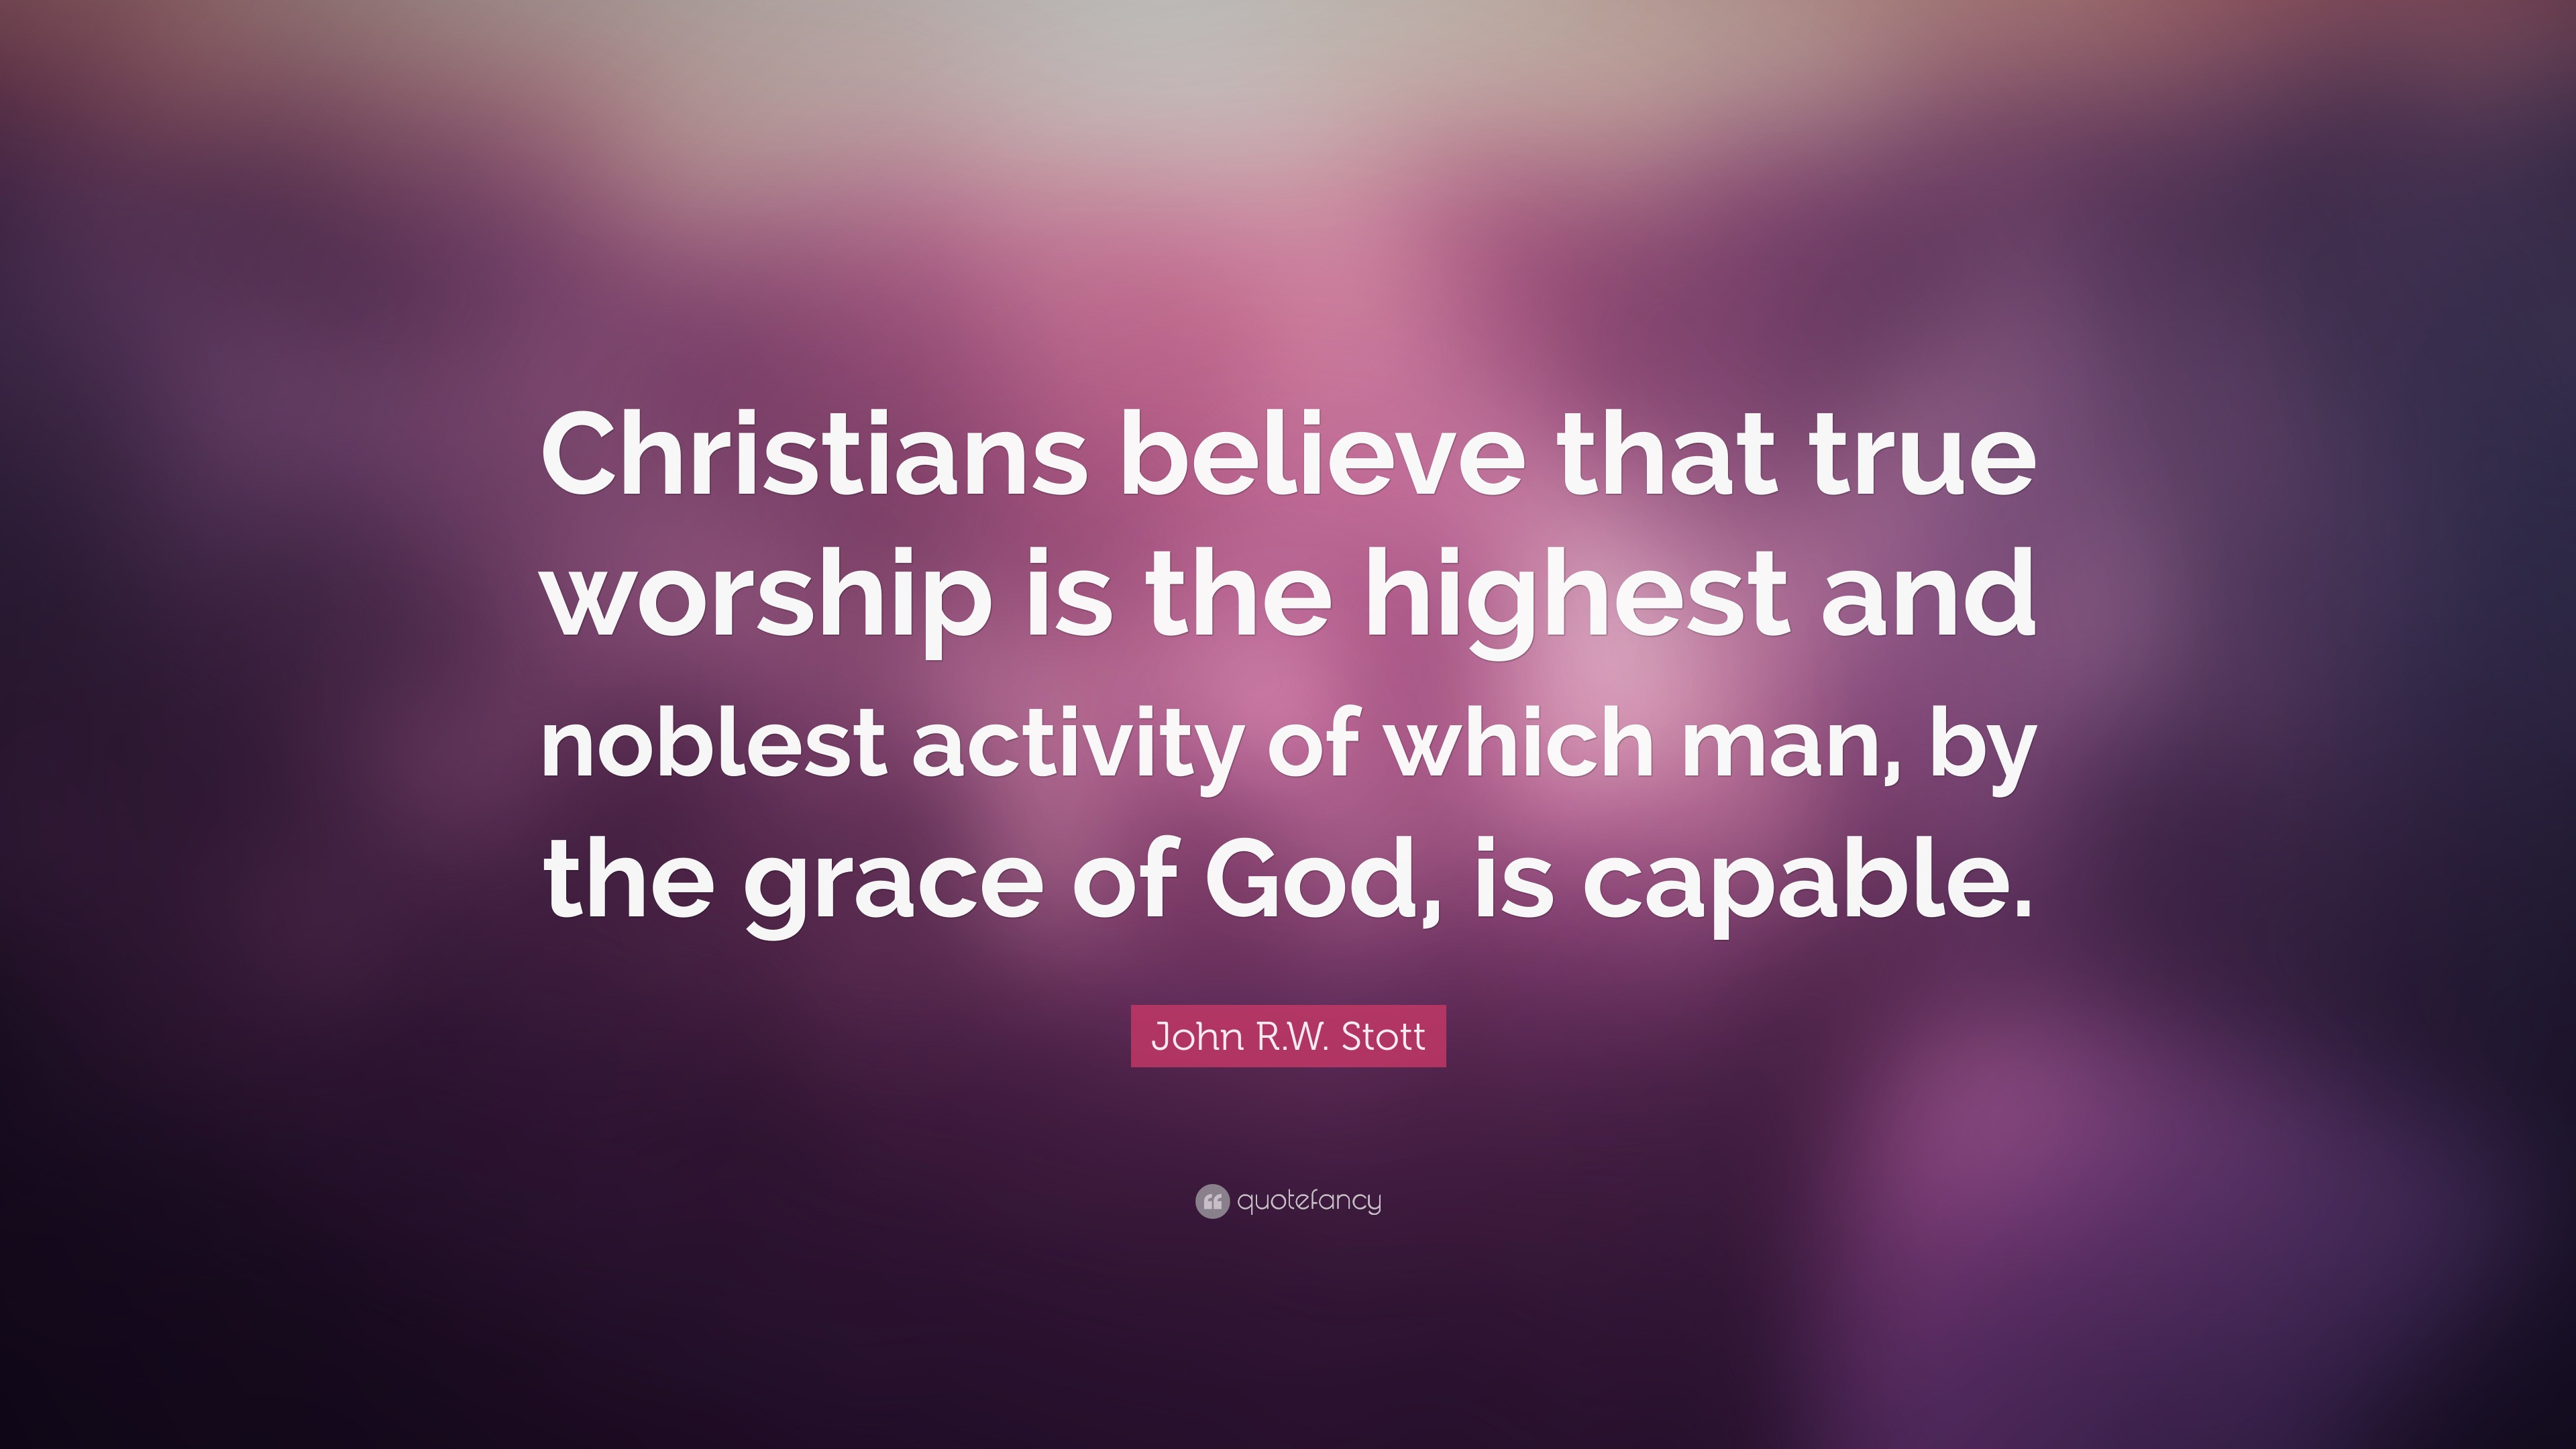 John R.W. Stott Quote: “Christians believe that true worship is the ...